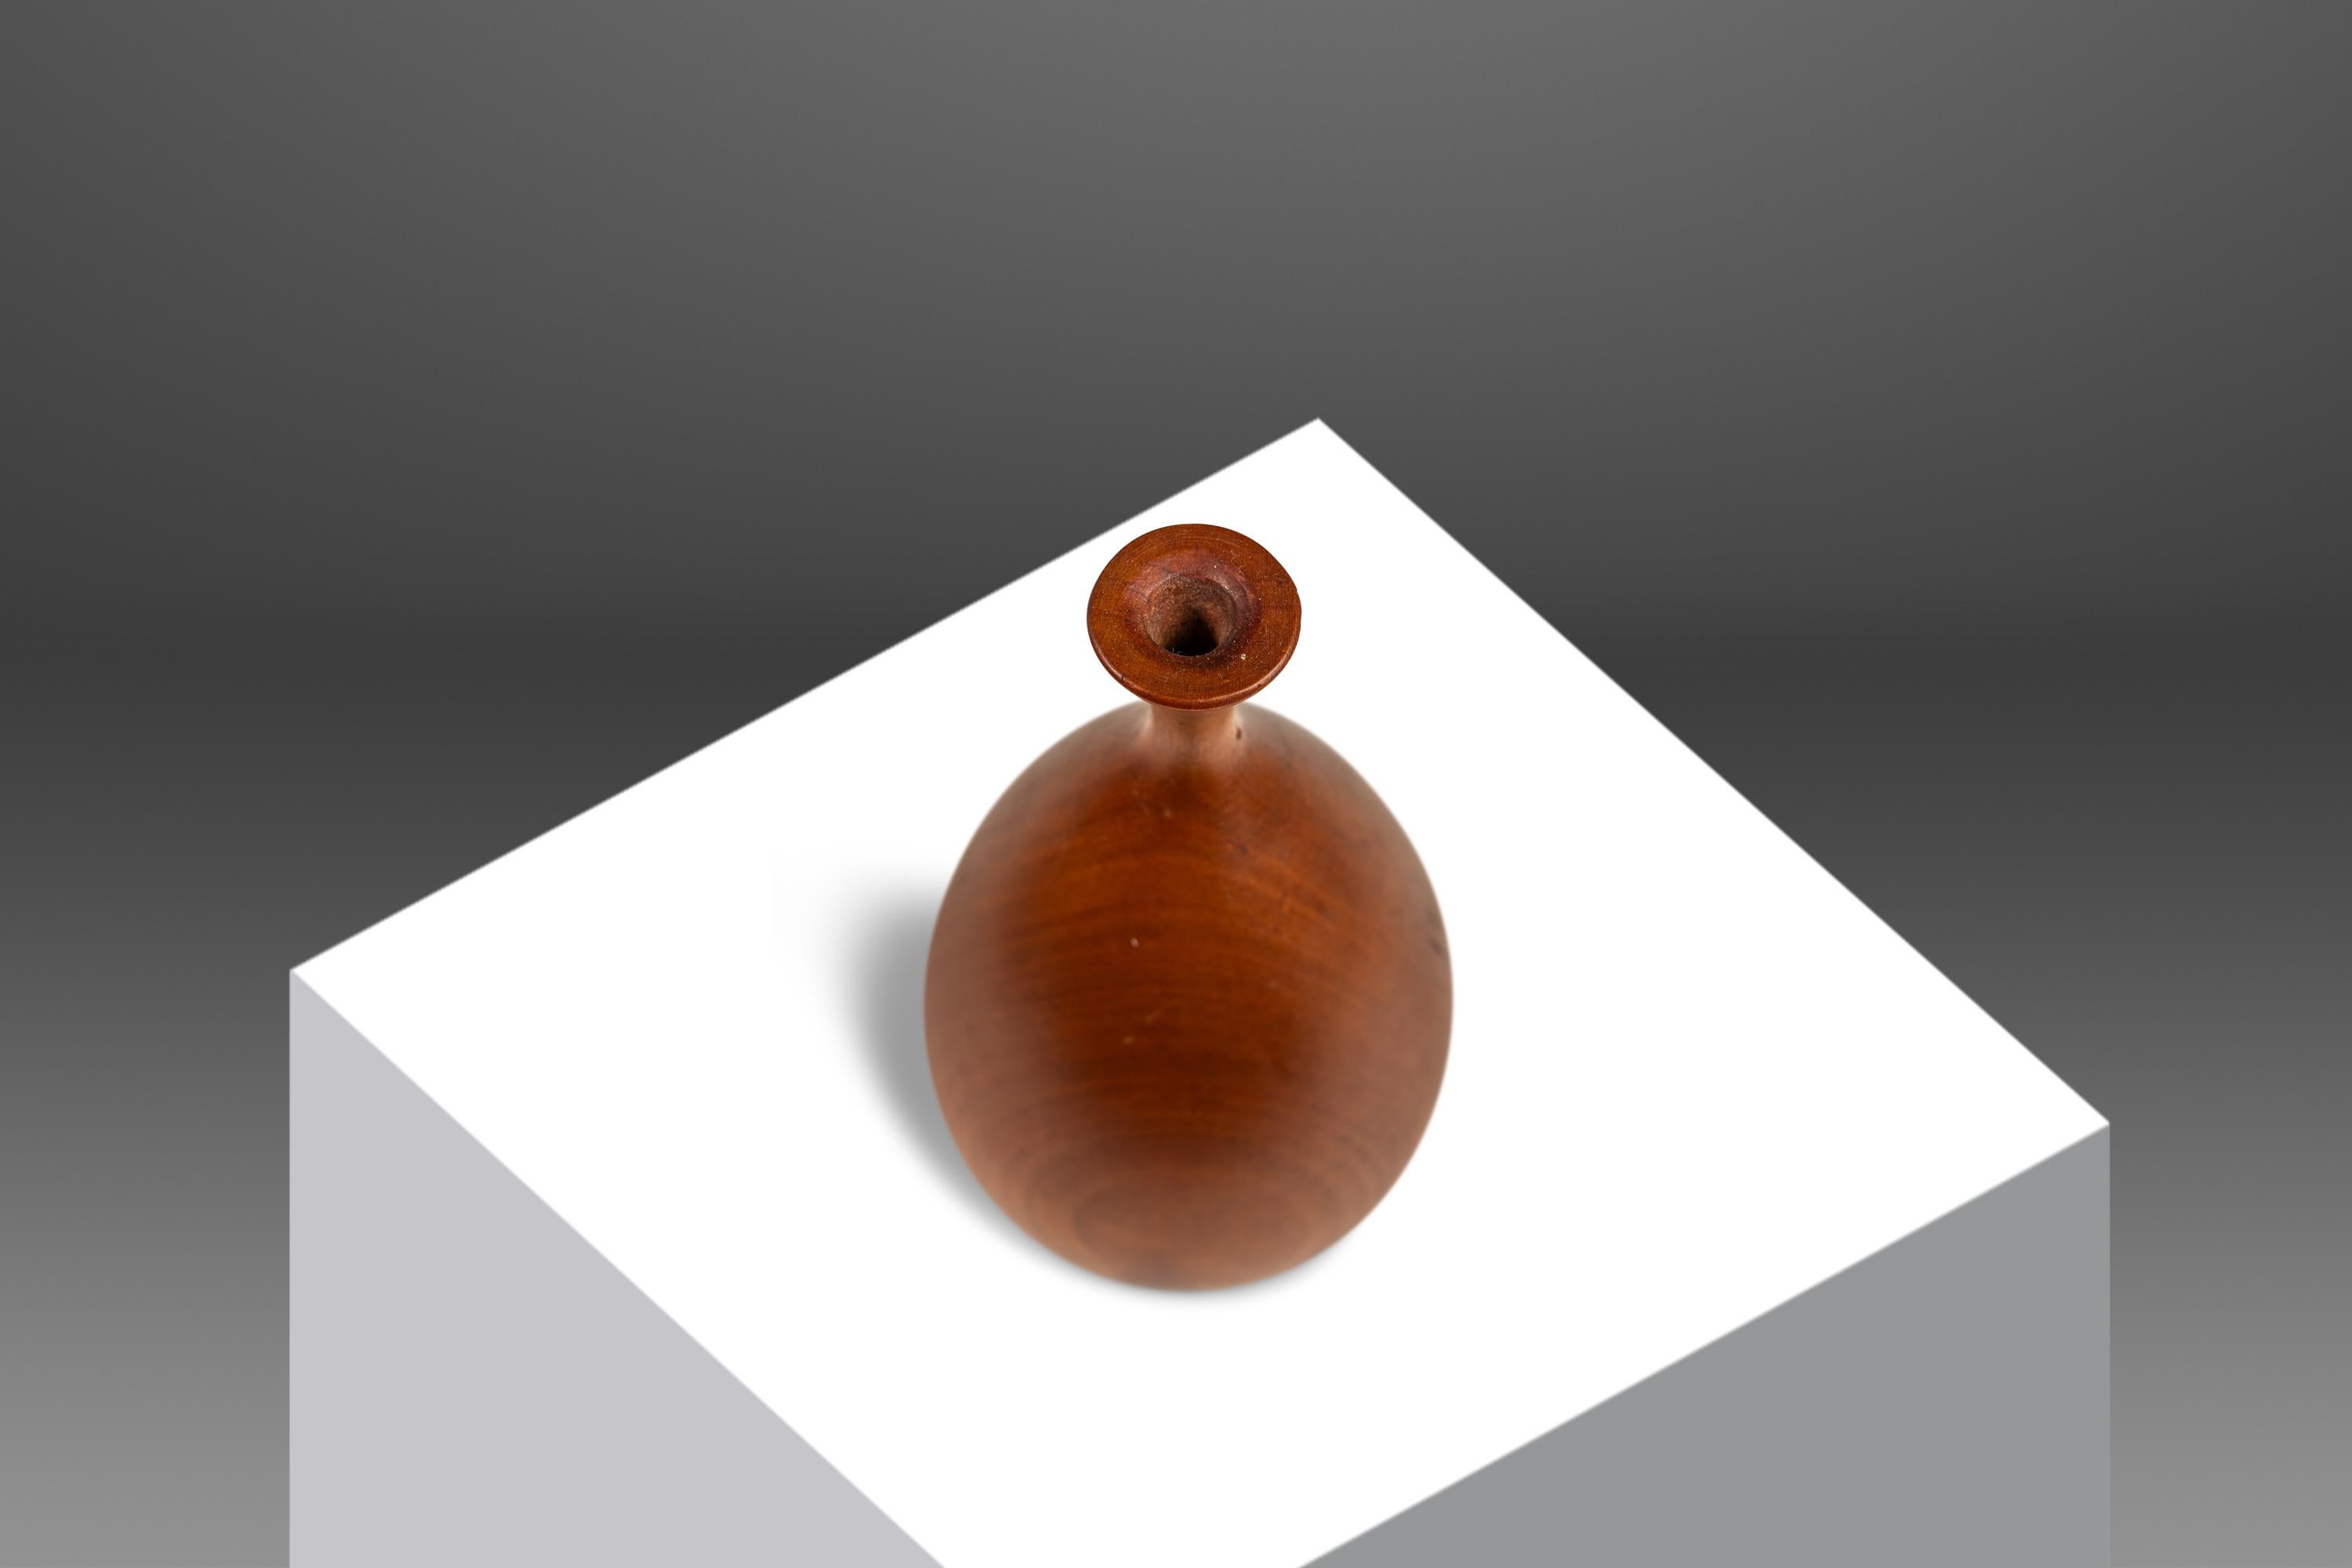 Signed Petite Wood-Turned Vase in solid Walnut by George Biersdorf, USA, c. 1979 For Sale 2